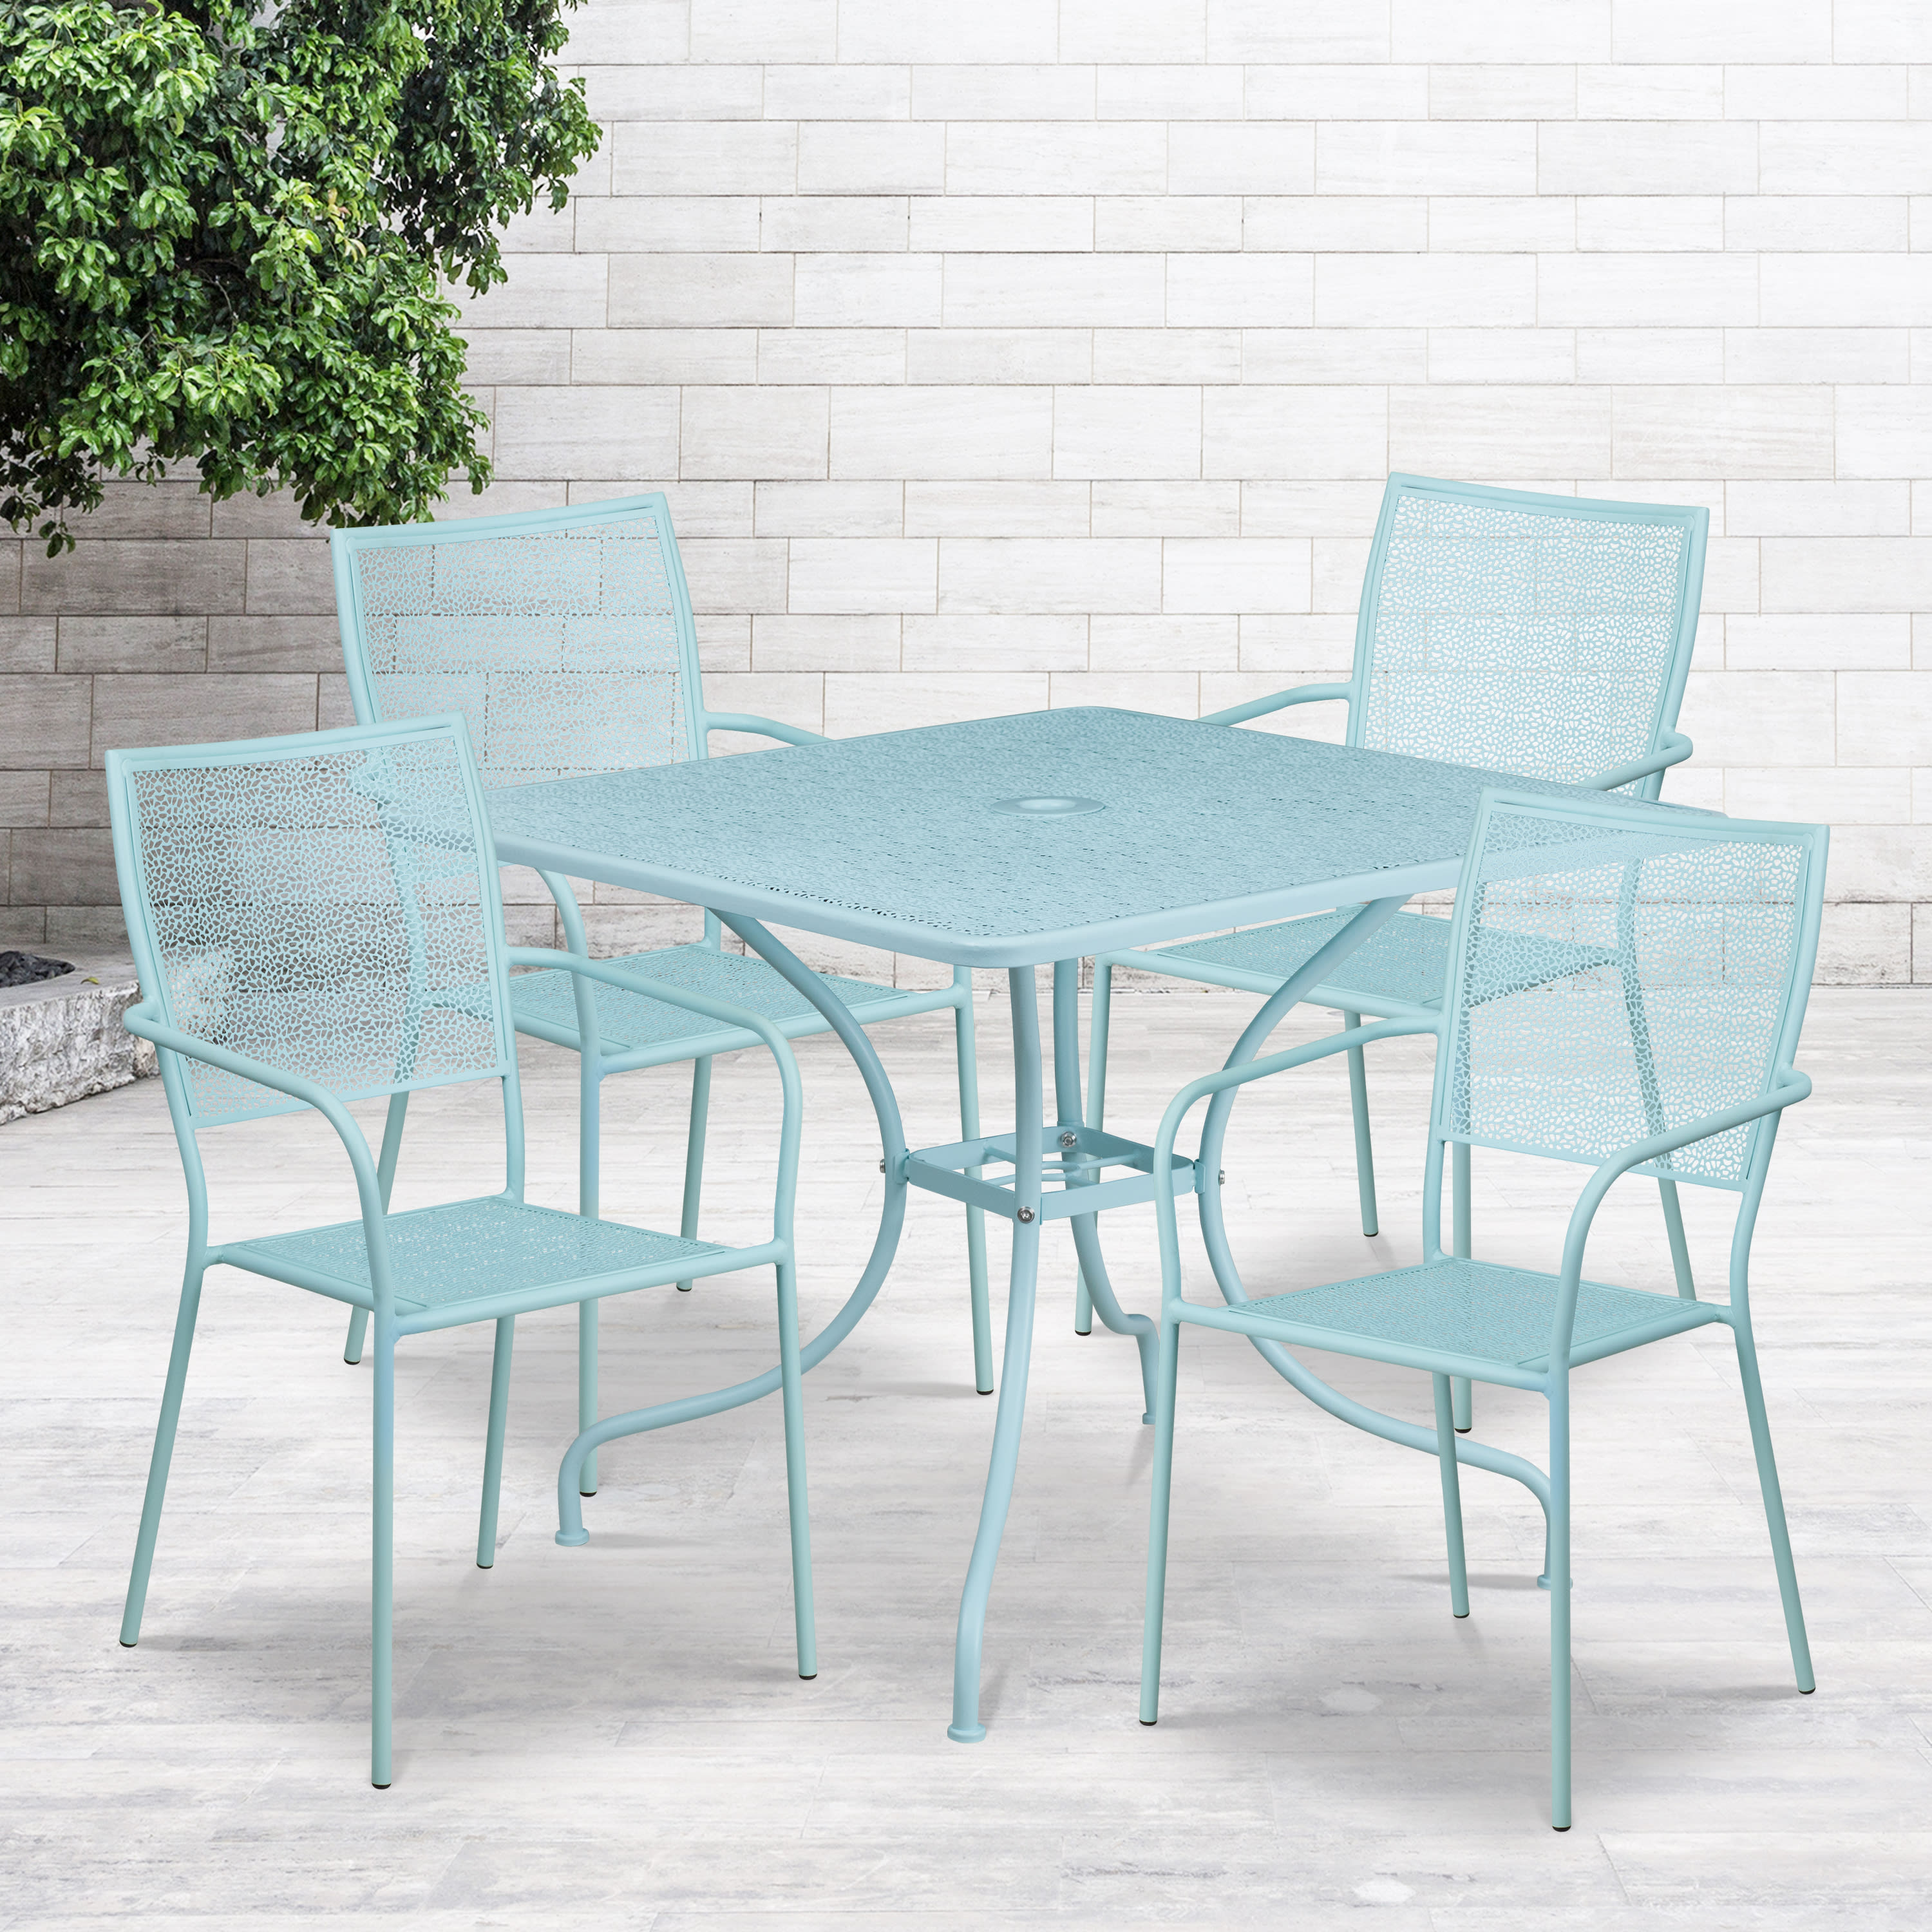 Flash Furniture Oia Commercial Grade 35.5" Square Sky Blue Indoor-Outdoor Steel Patio Table Set with 4 Square Back Chairs - image 2 of 5